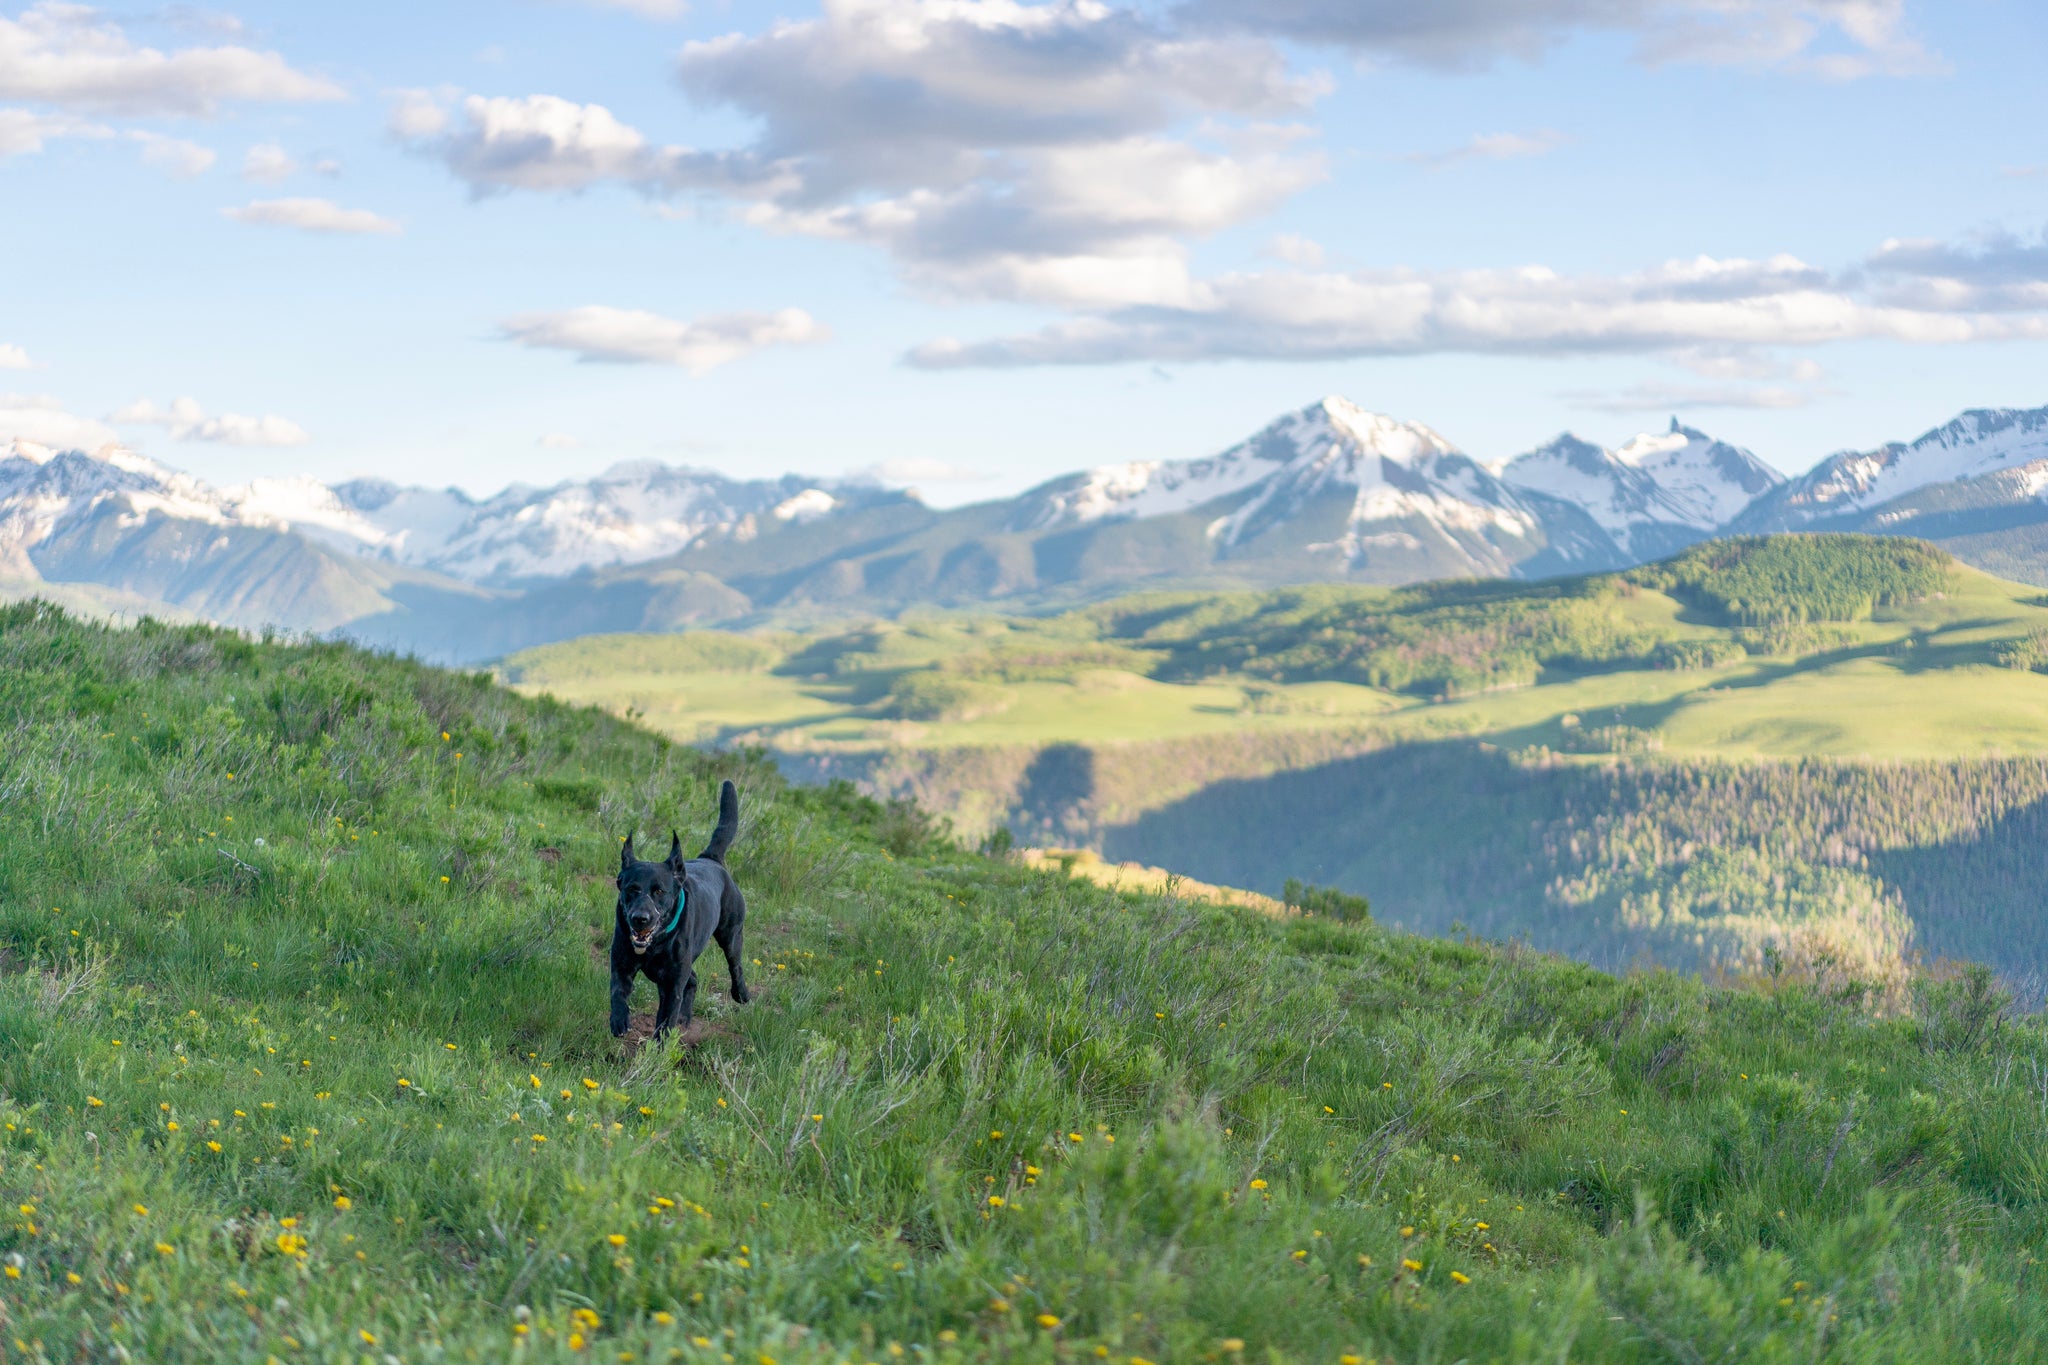 Dog running in a field with mountains in the backdrop - Atlas Pet Company Hiking with Dogs